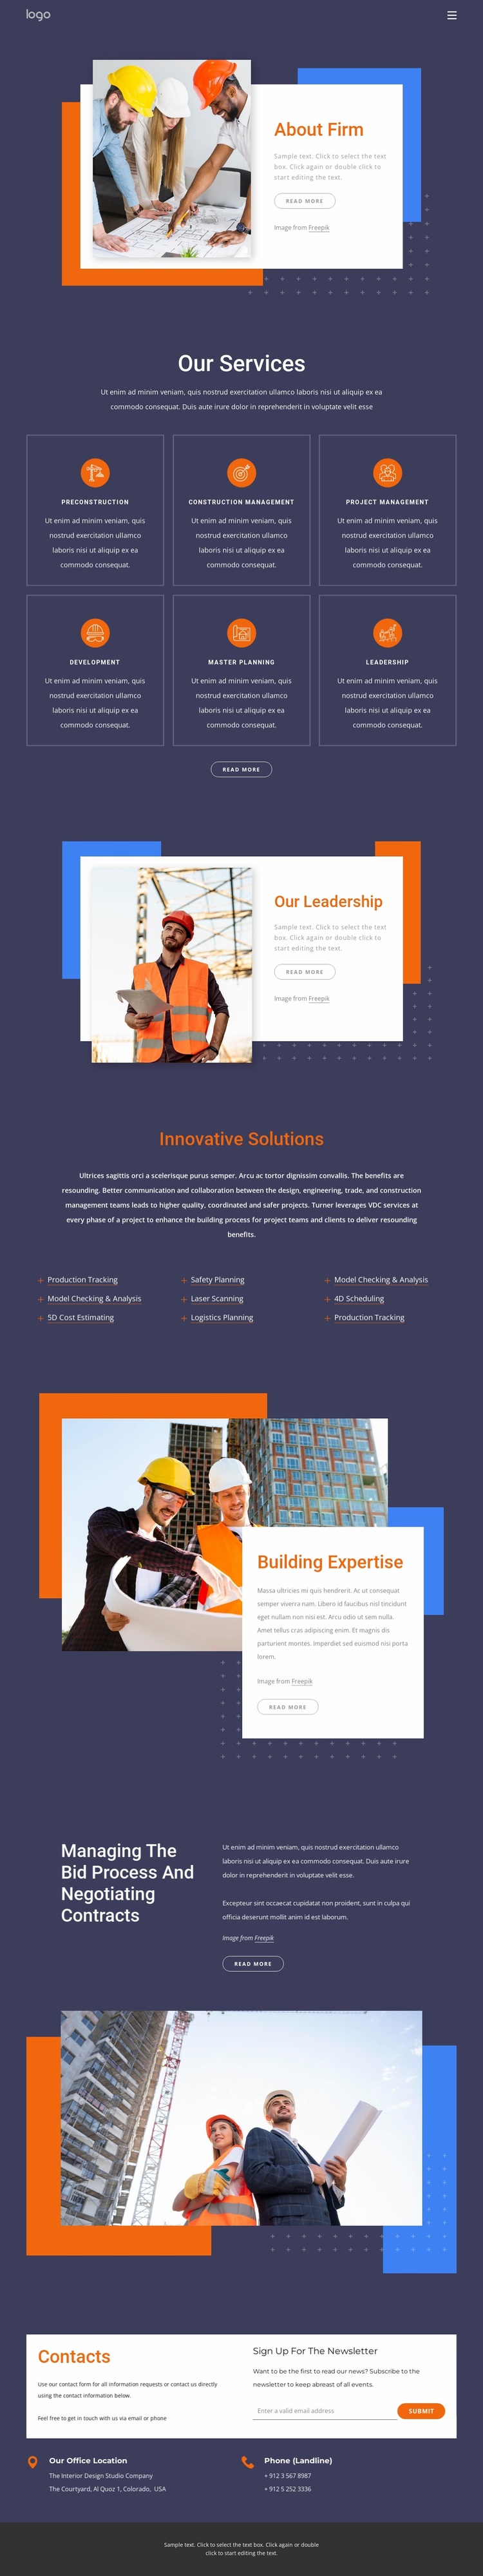 We build the structures and infrastructure Website Design